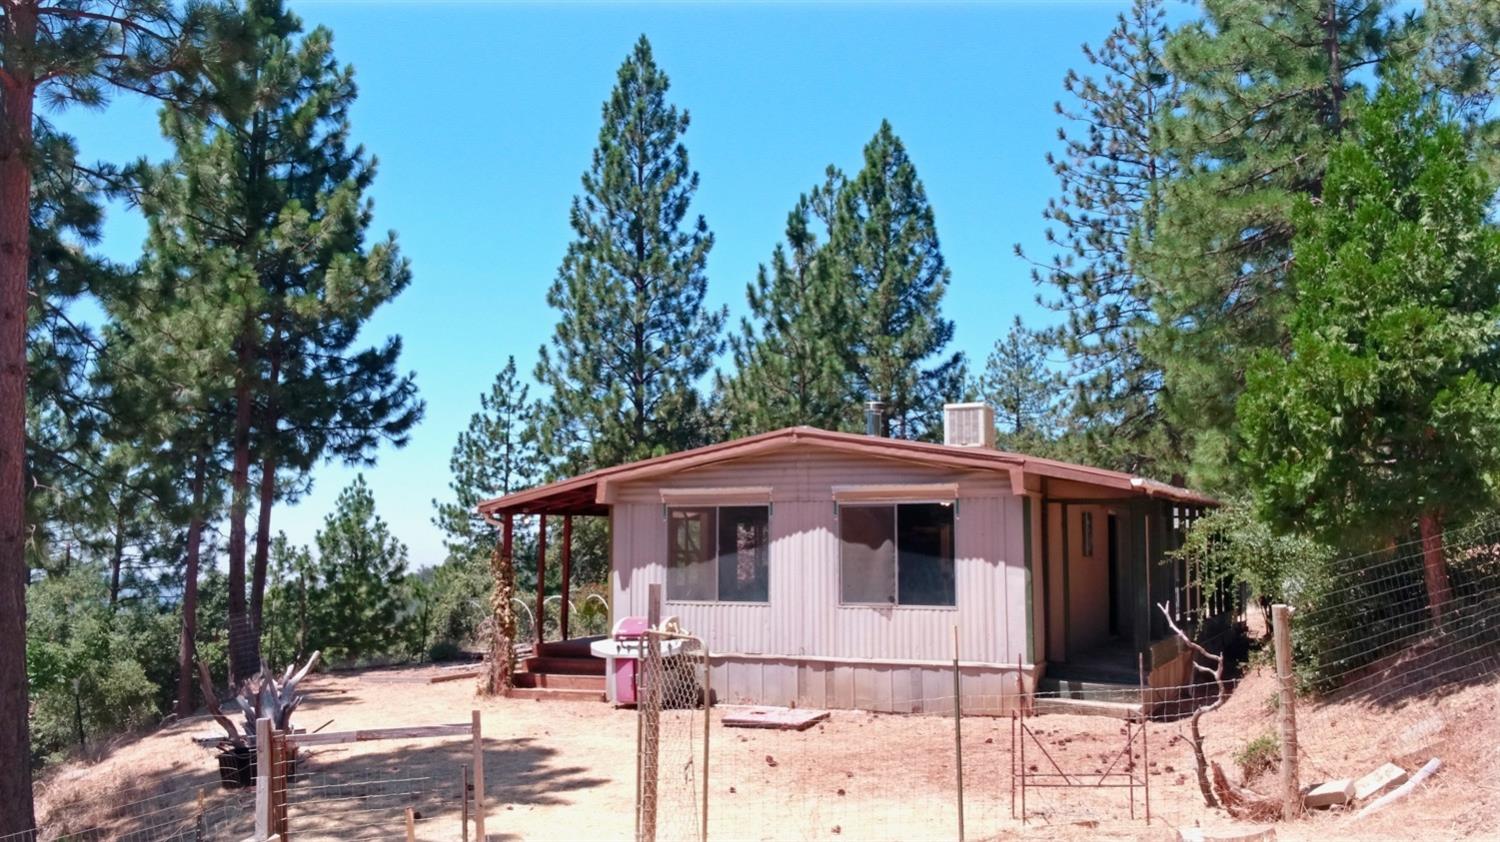 Photo of 5695 Donkey Ln in Coulterville, CA